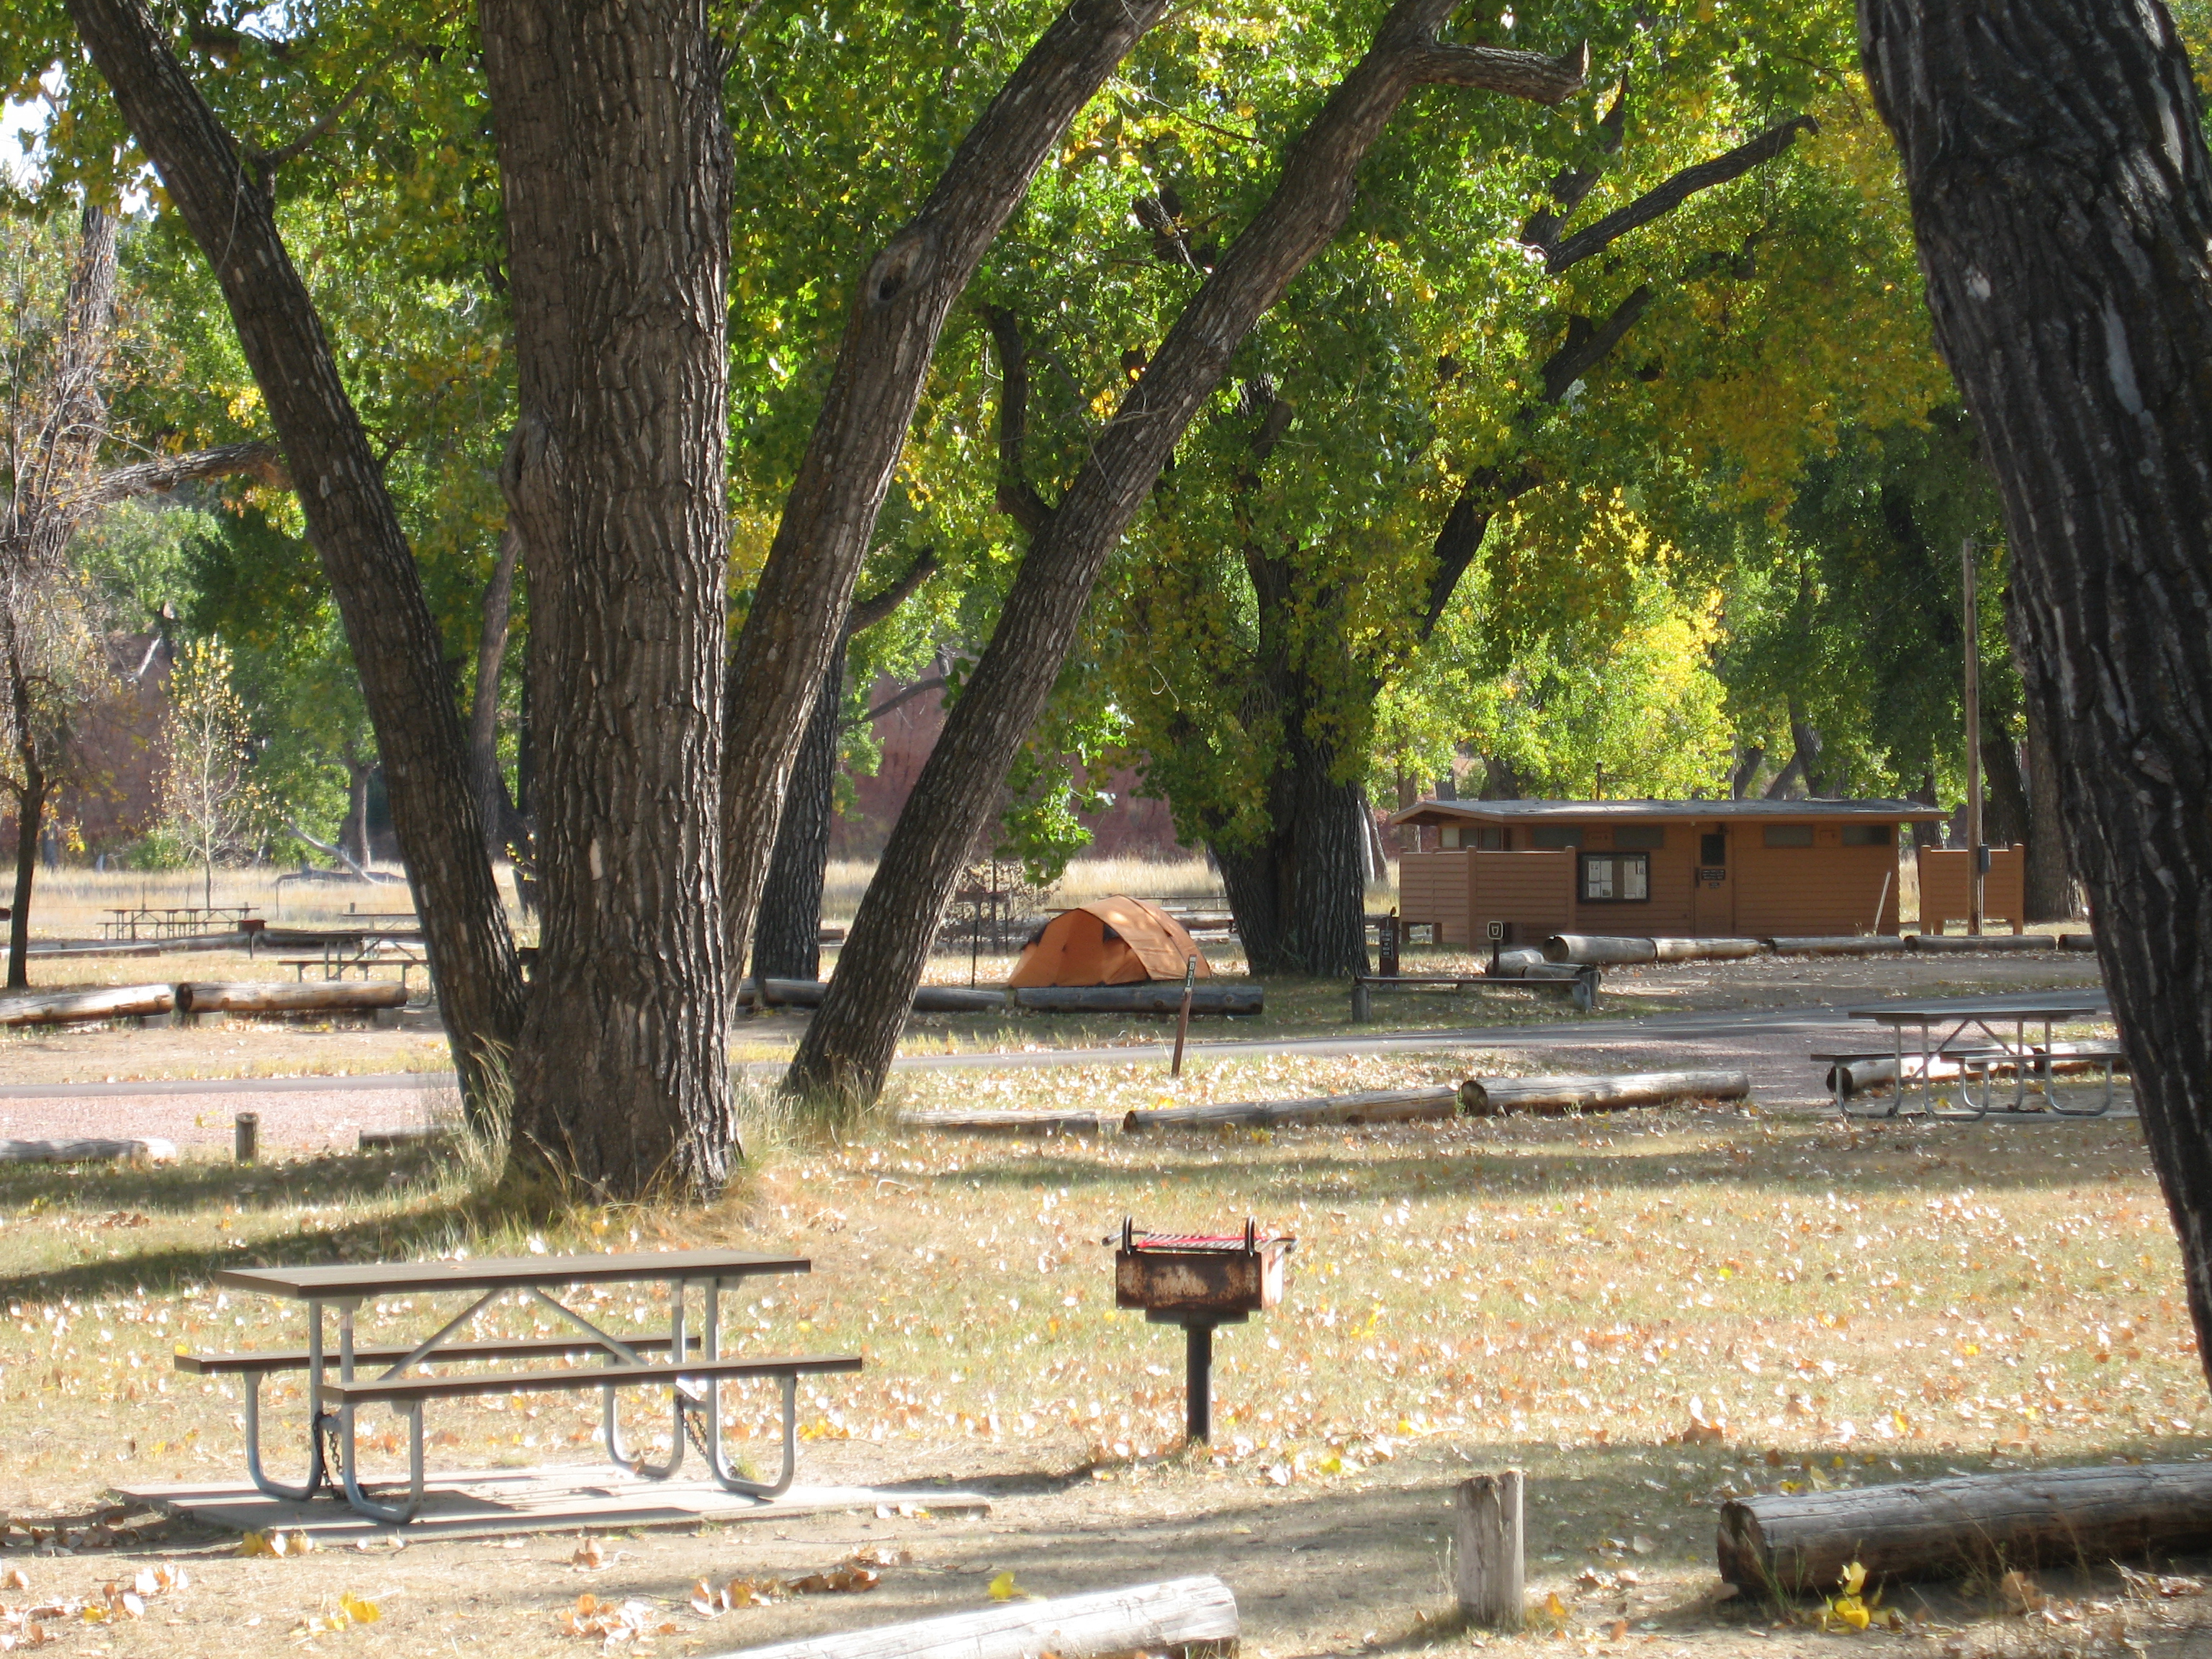 A peaceful, quiet campground with tents, fire grates and picnic benches.